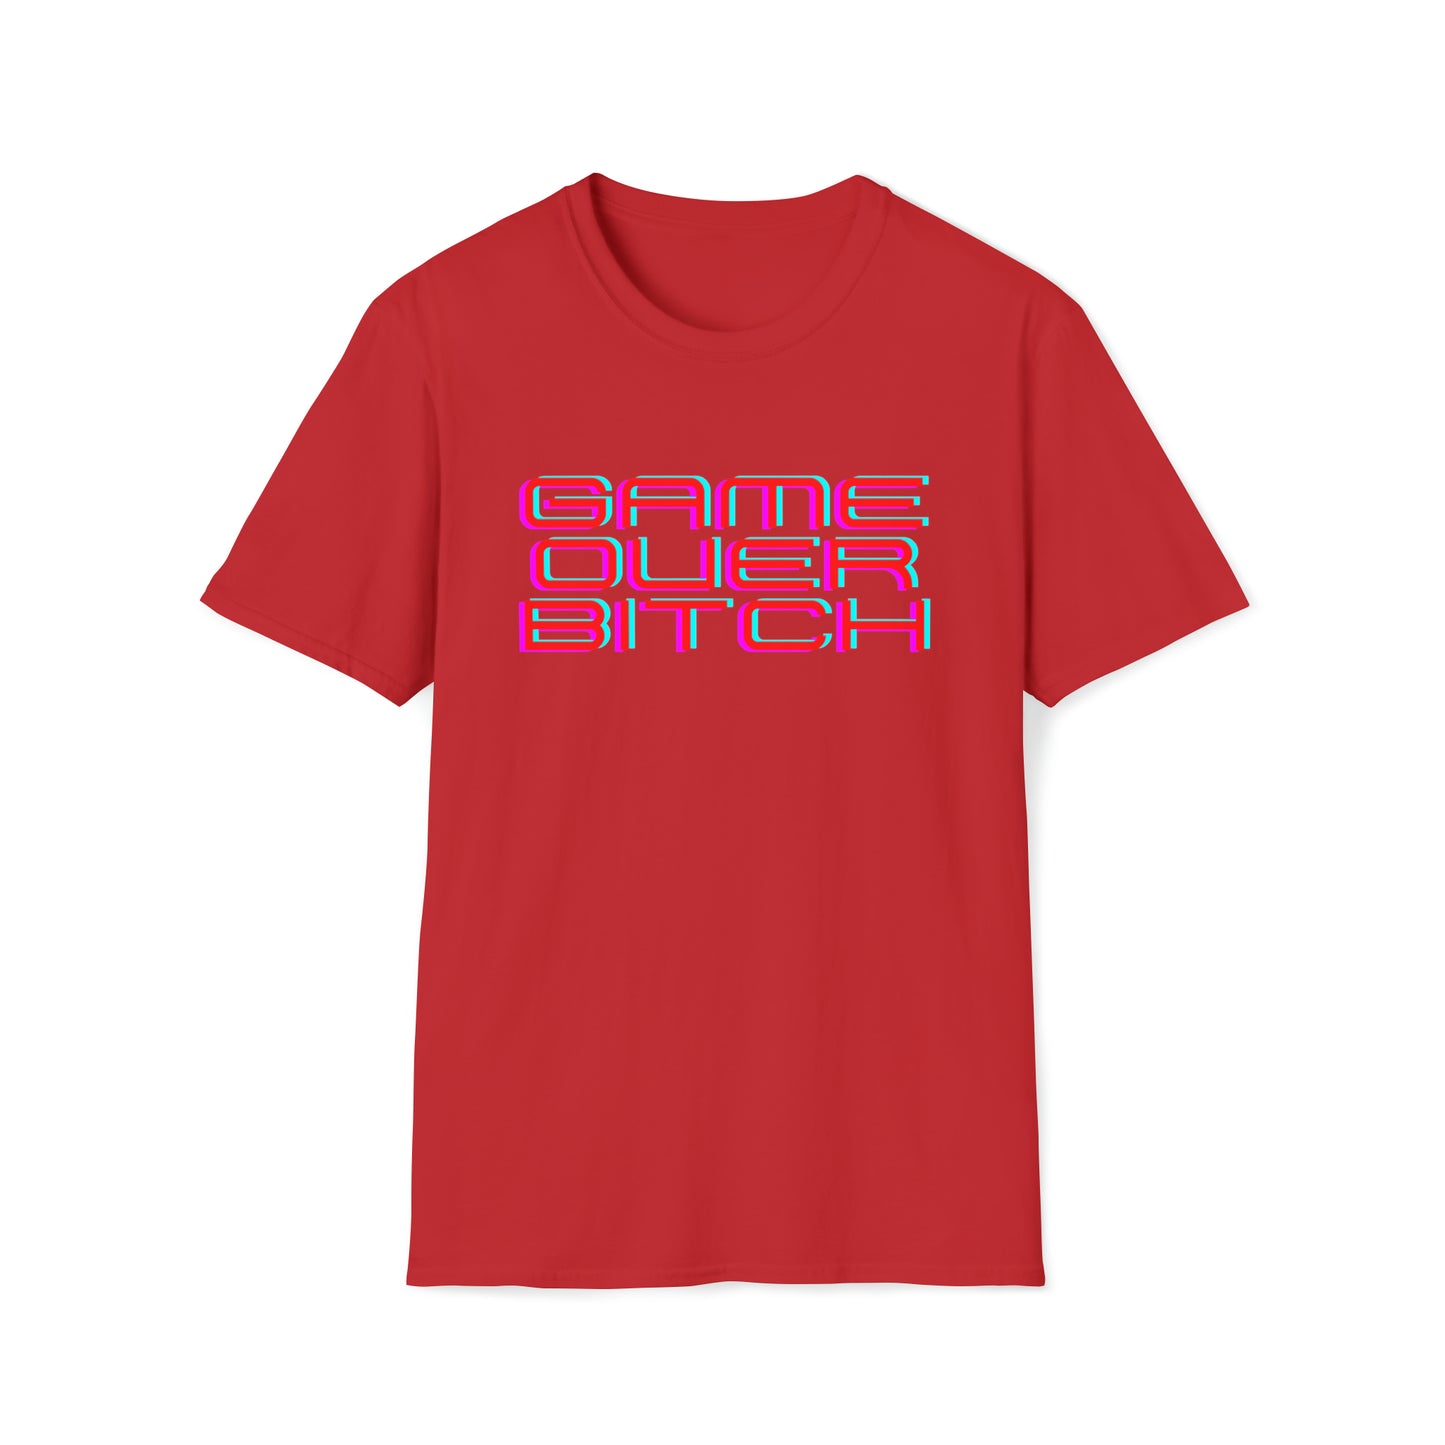 GAME OVER BITCH T-SHIRT